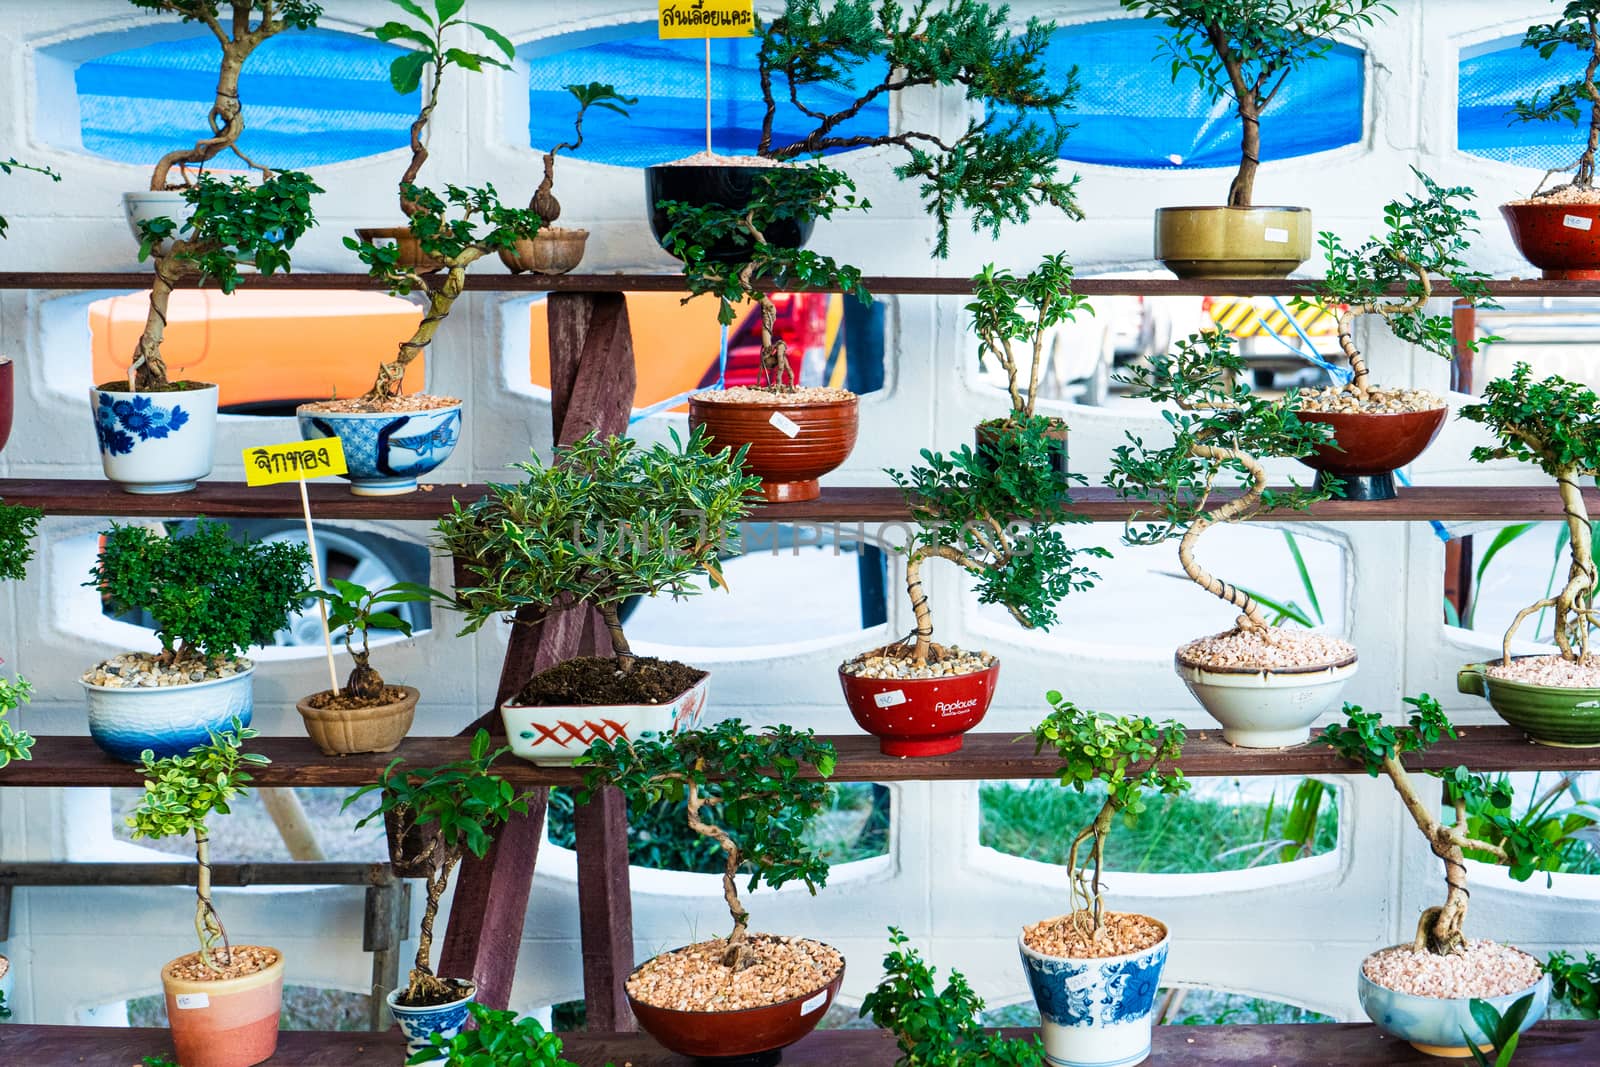 Decorative plants for decorating a room in a street market in Asia.